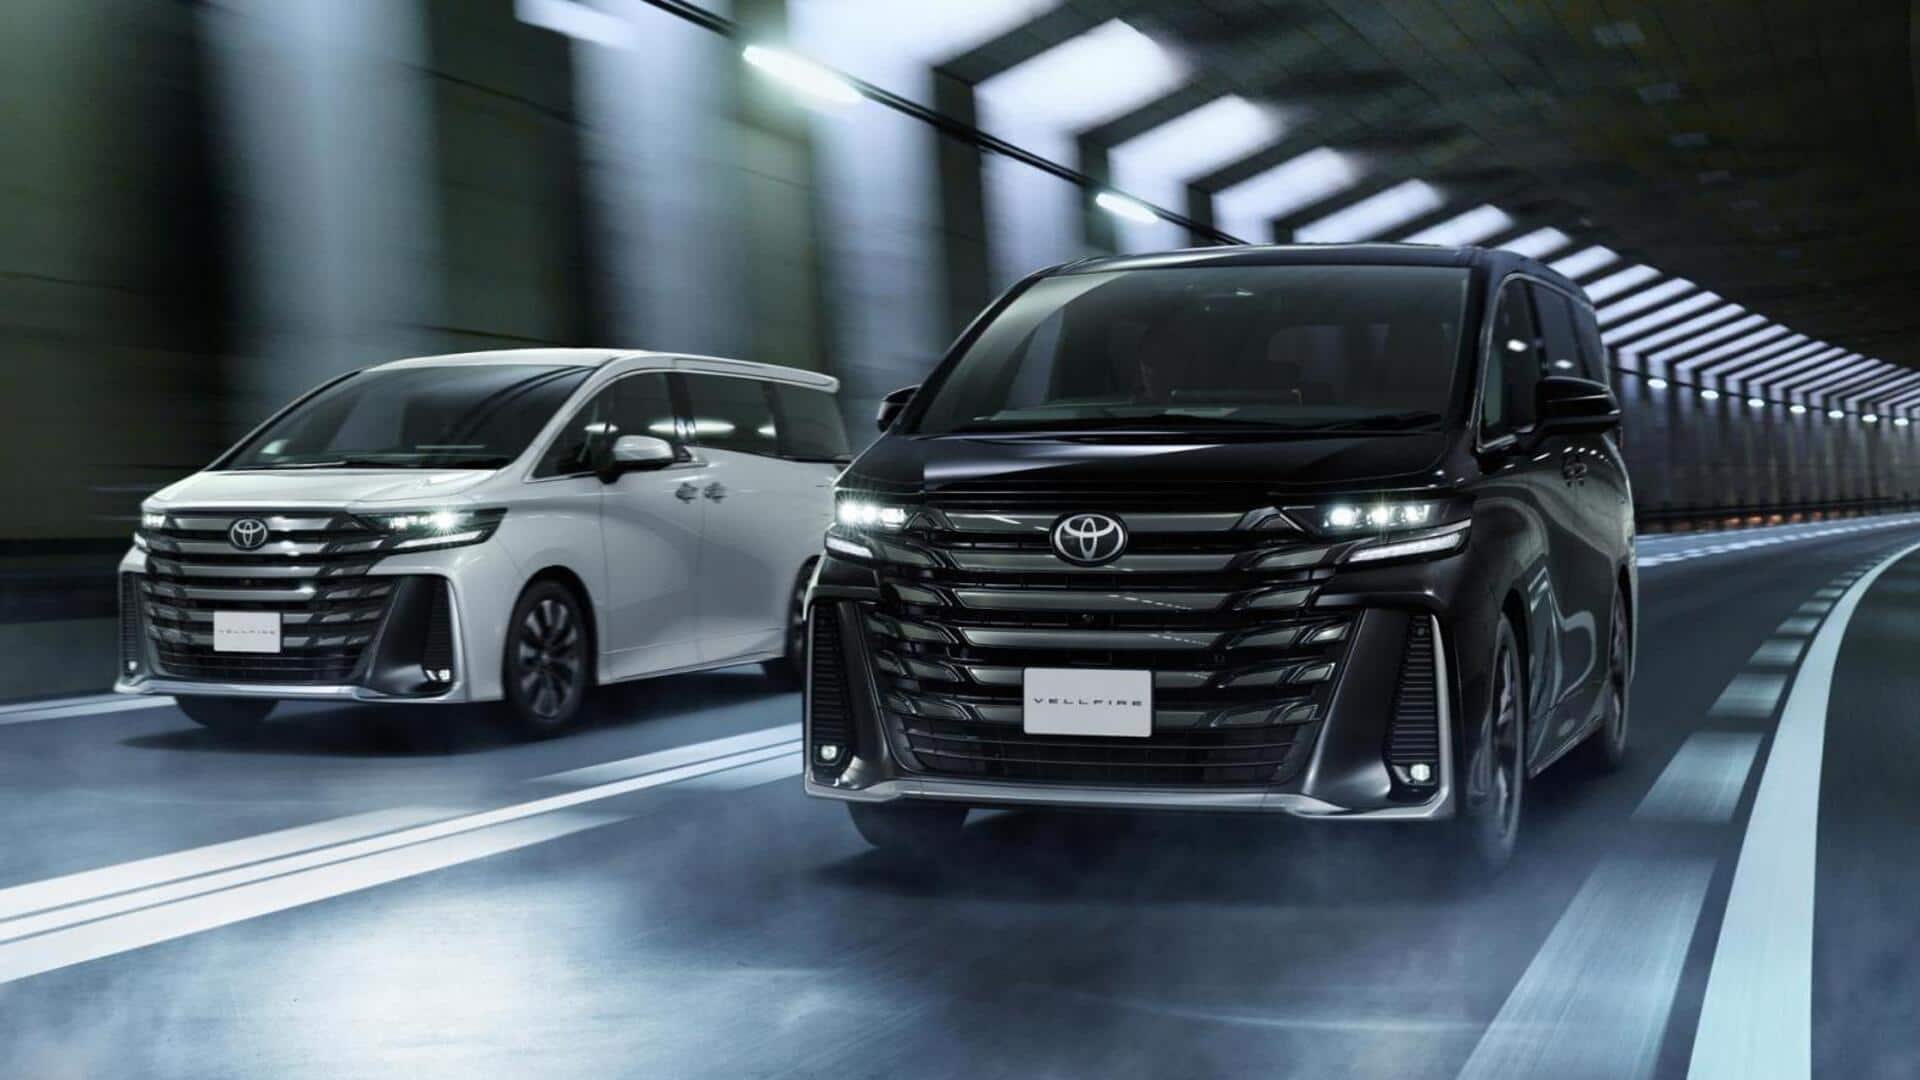 Toyota Vellfire launched in India at Rs. 1.2 crore